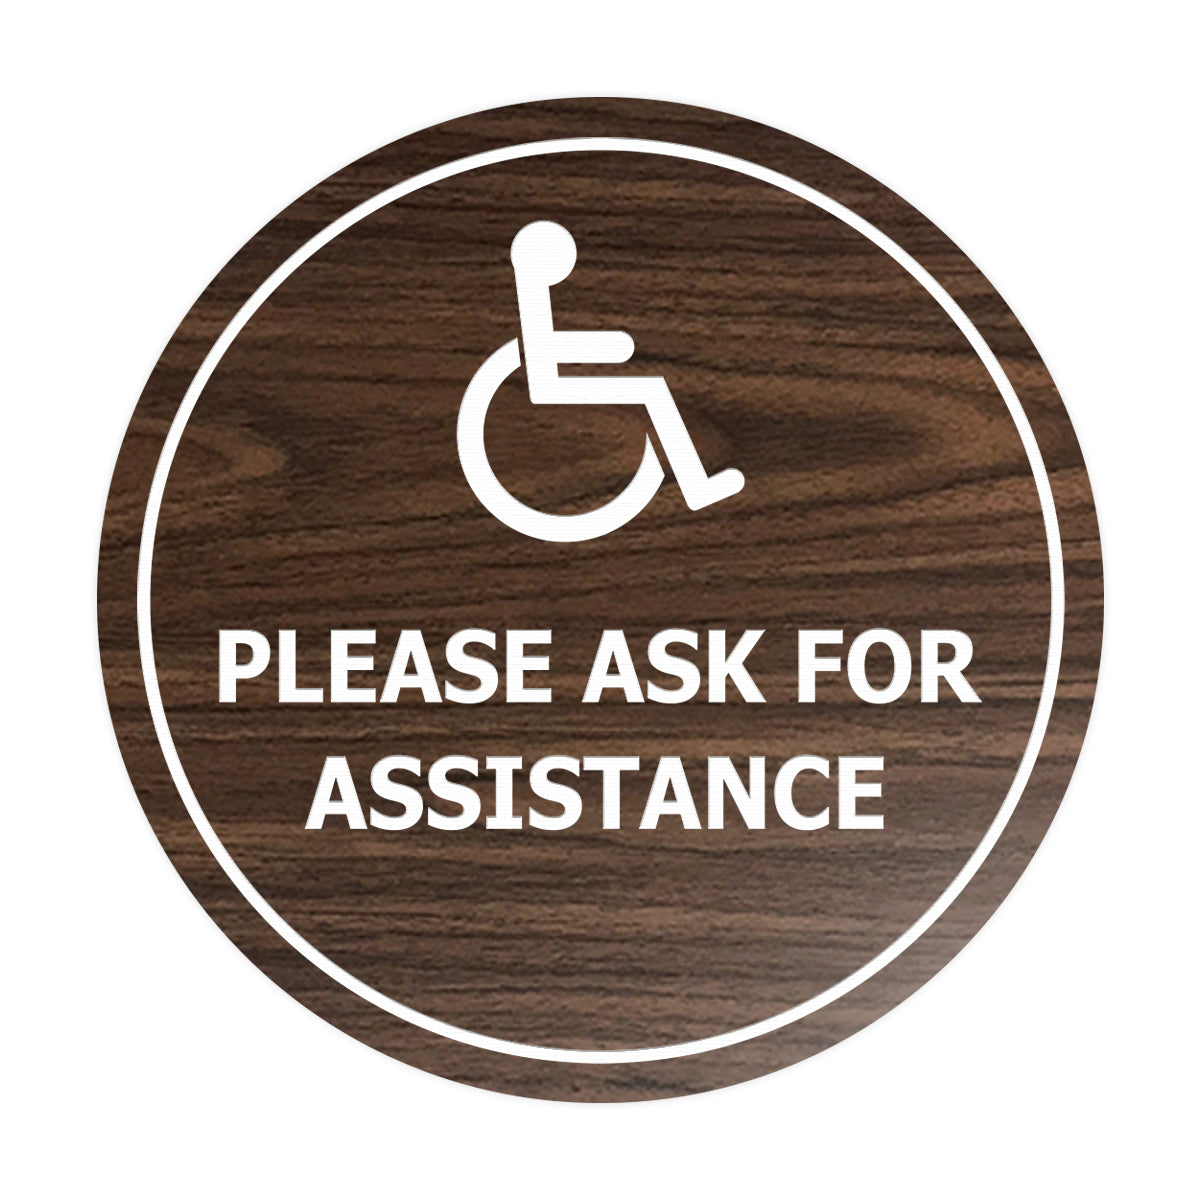 Circle Wheelchair Please Ask For Assistance Sign with Adhesive Tape, Mounts On Any Surface, Weather Resistant, Indoor/Outdoor Use